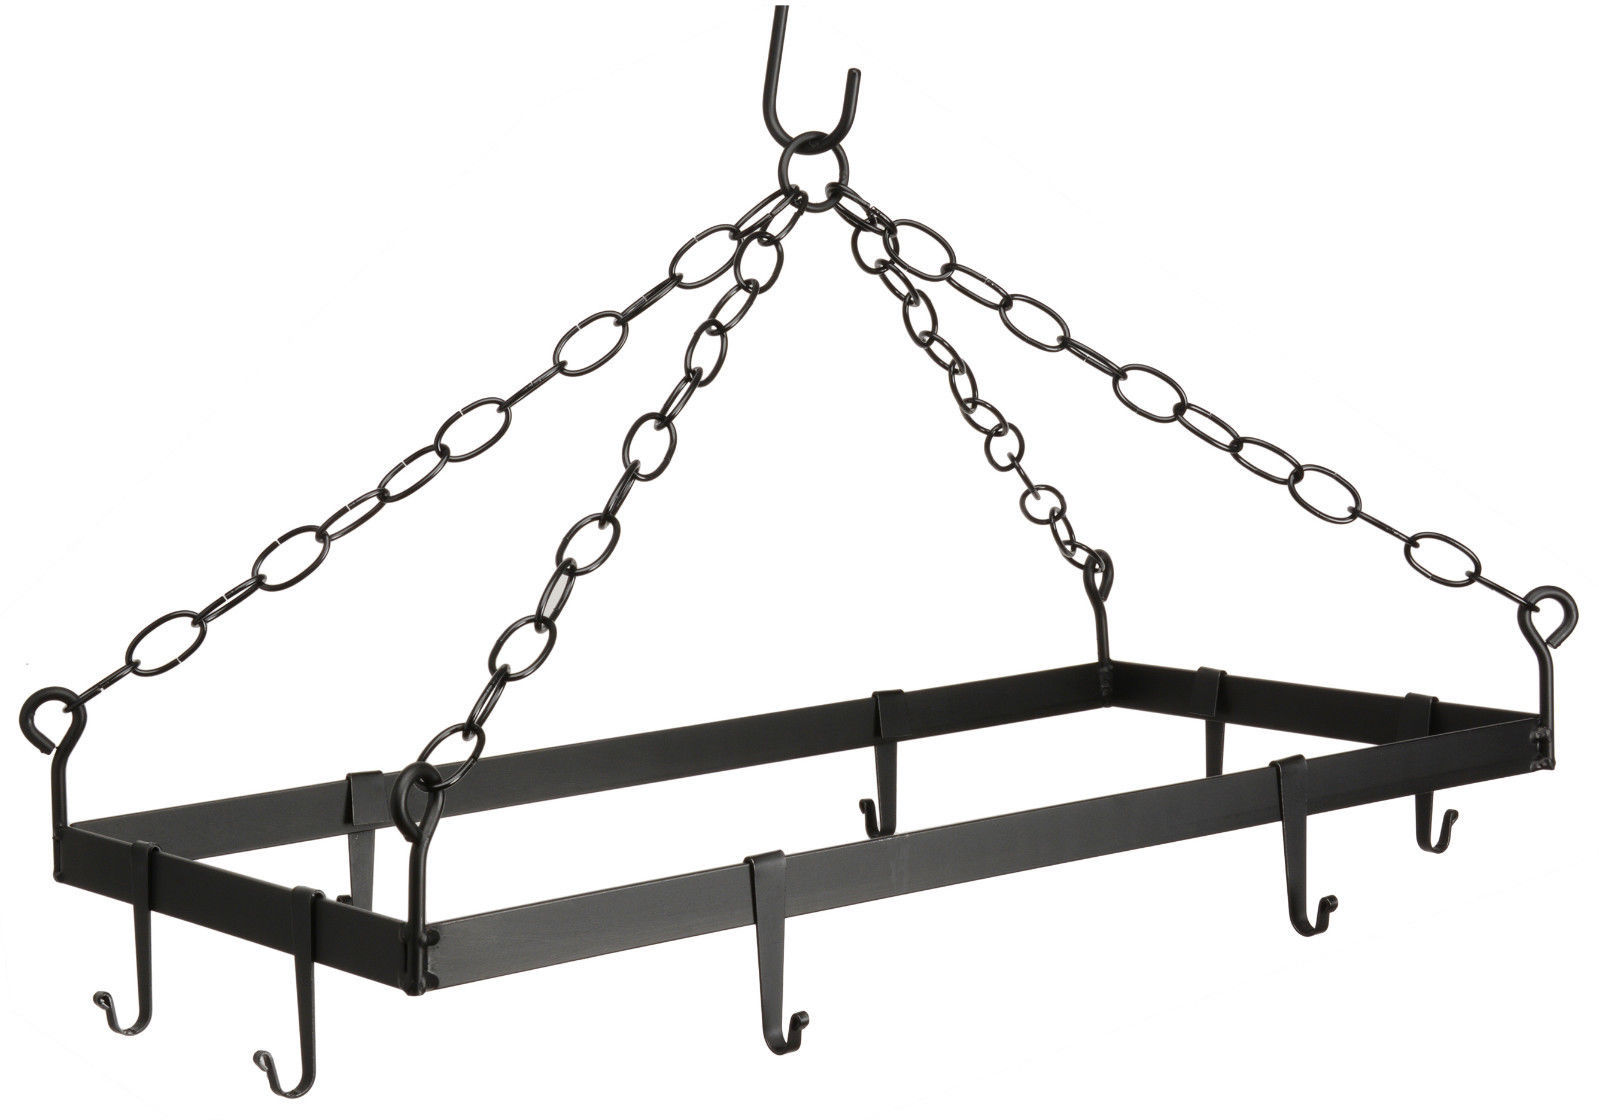 HANGING POT & PAN RACK Wrought Iron Kitchen Holder with 8 Scroll Hooks AMISH USA - $109.97